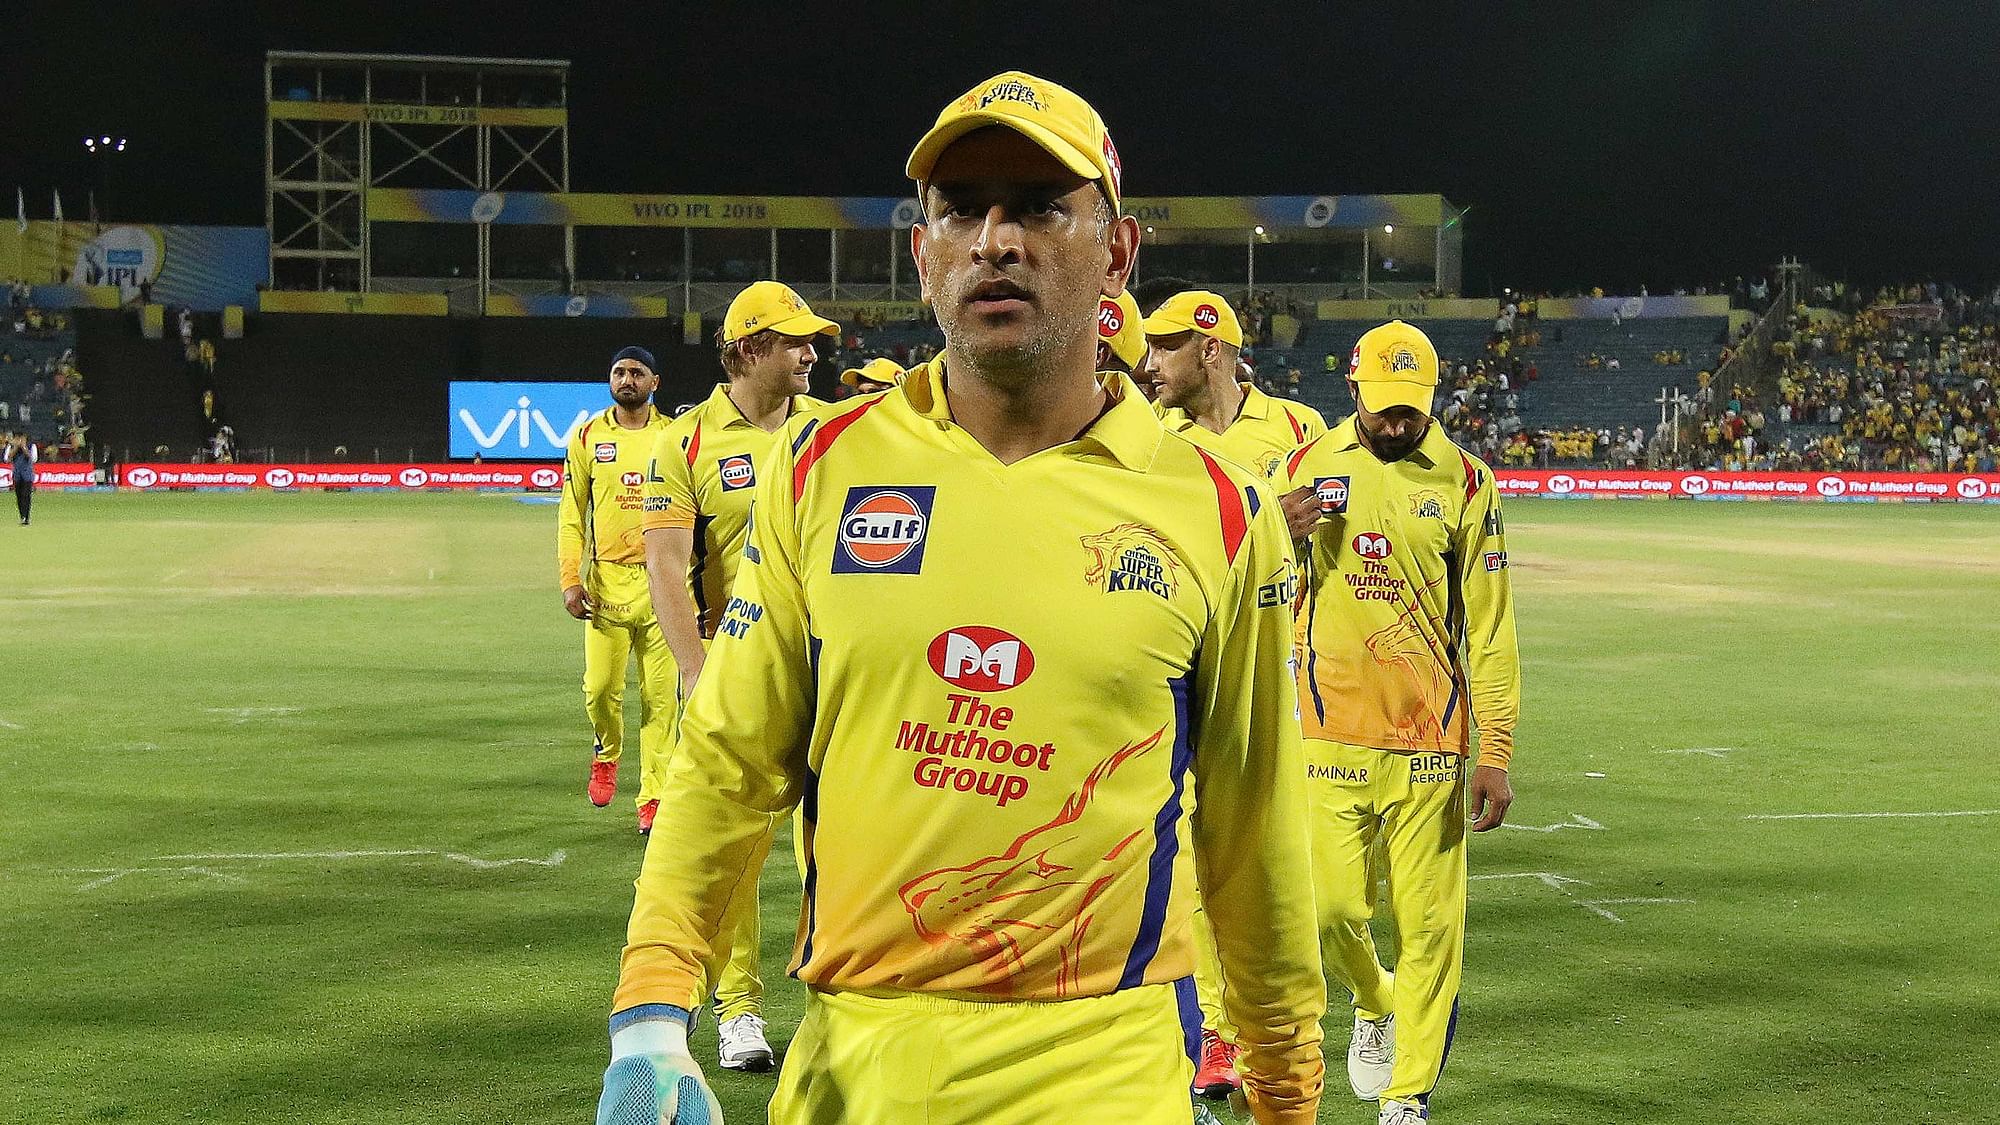 MS Dhoni’s team selection at the IPL auction played a crucial part in CSK winning the IPL 2018 title.